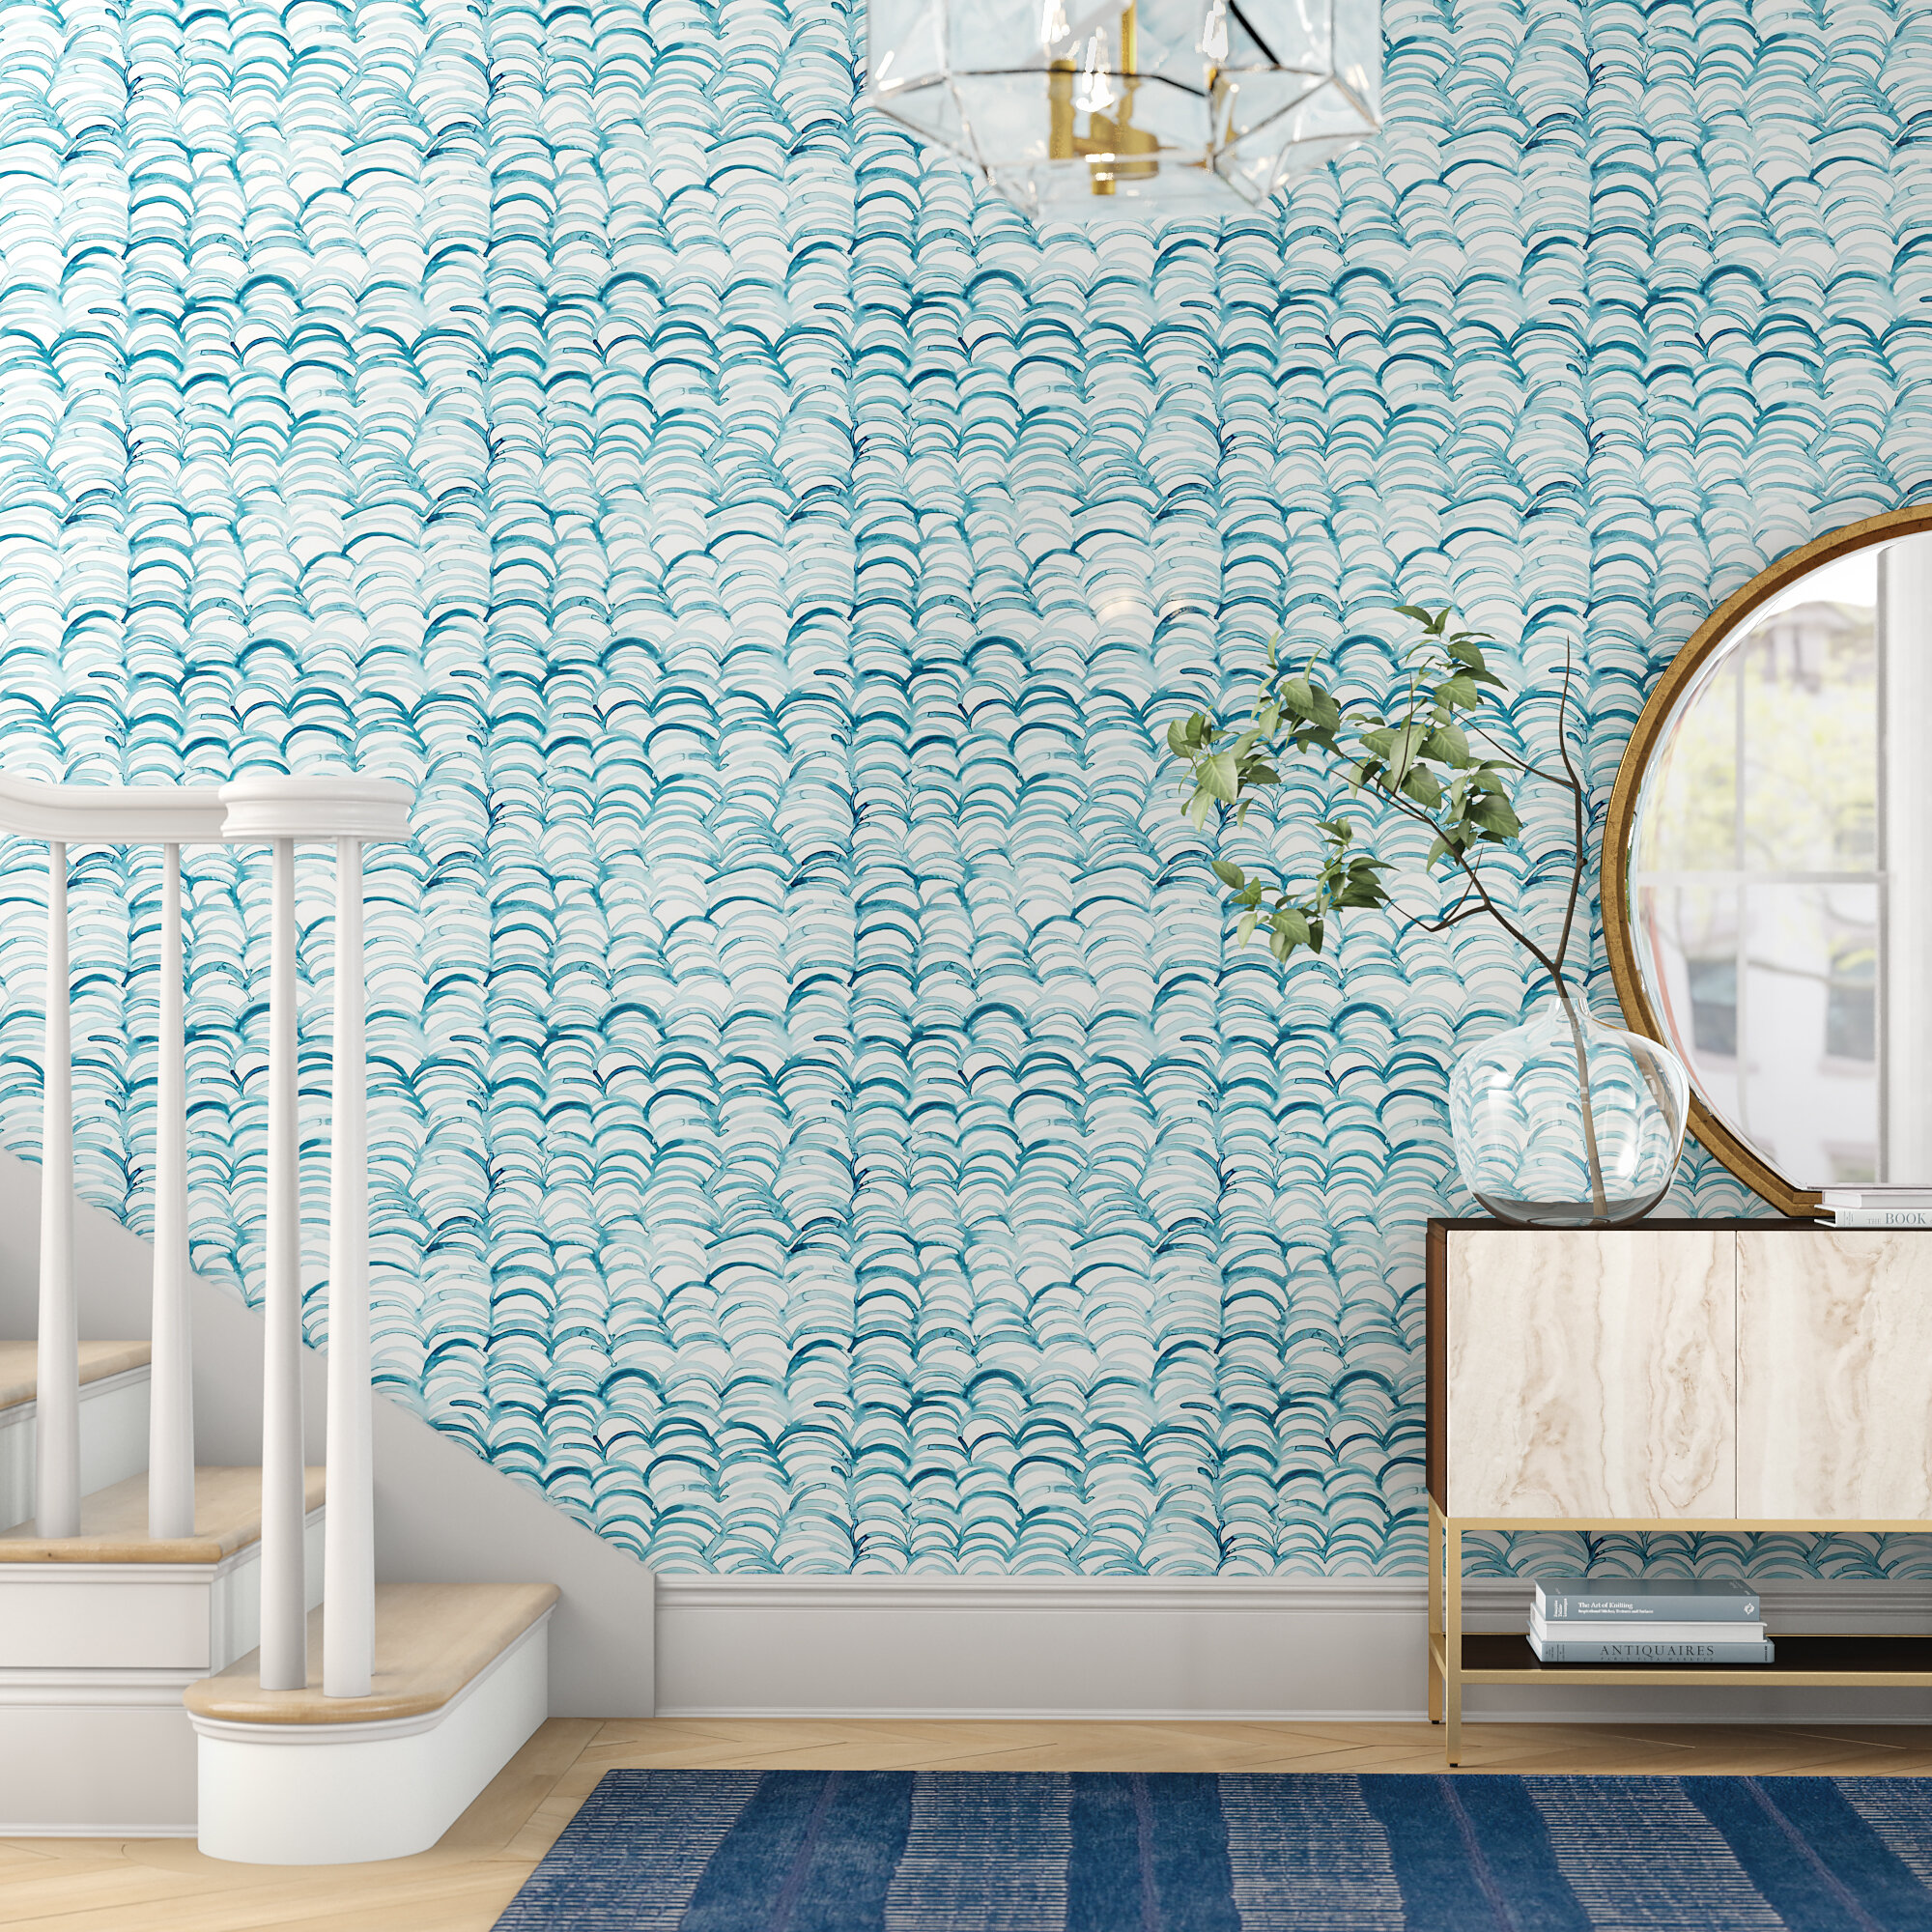 NextWall 3075 sq ft Teal Vintage Floral Vinyl Peel and Stick Wallpaper  Roll NW45712  The Home Depot